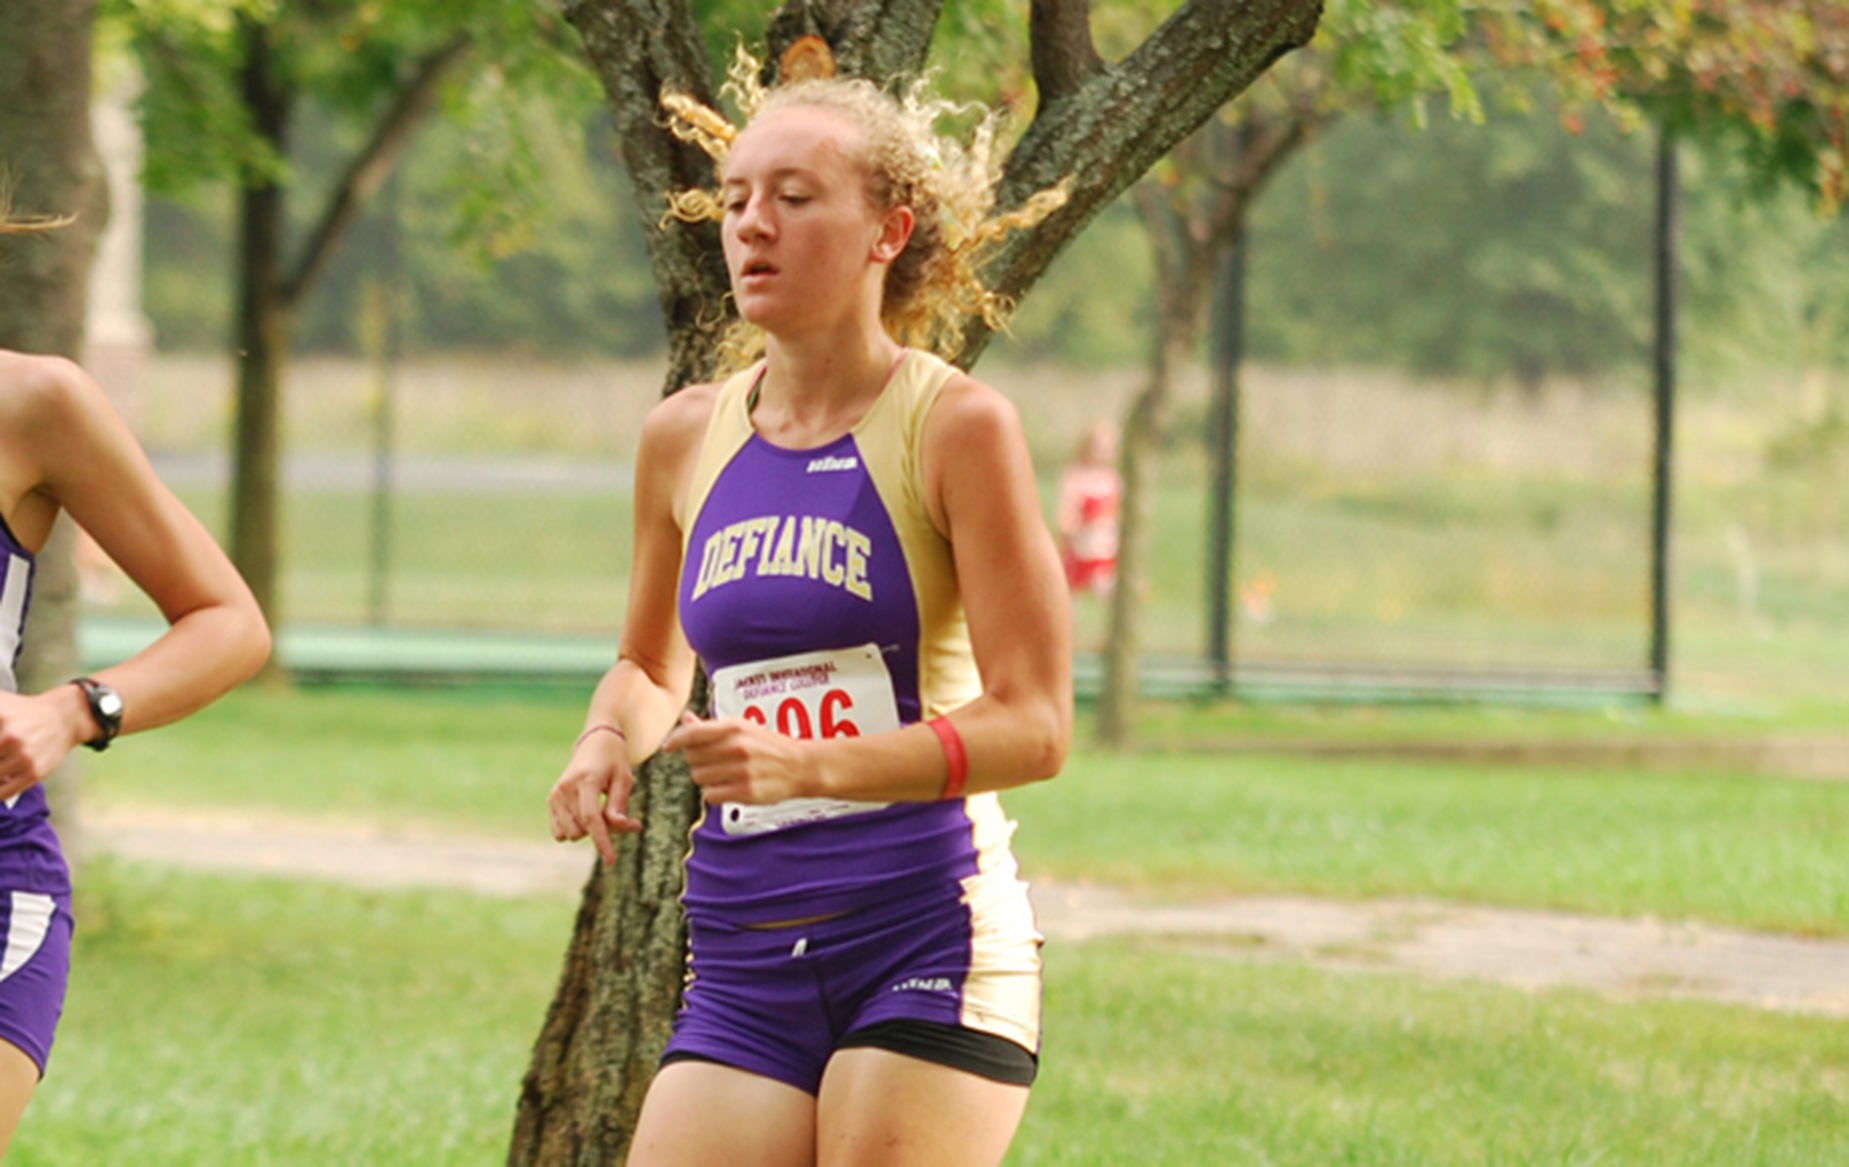 Stryffeler Leads Women’s Cross Country at Wilmington Invite